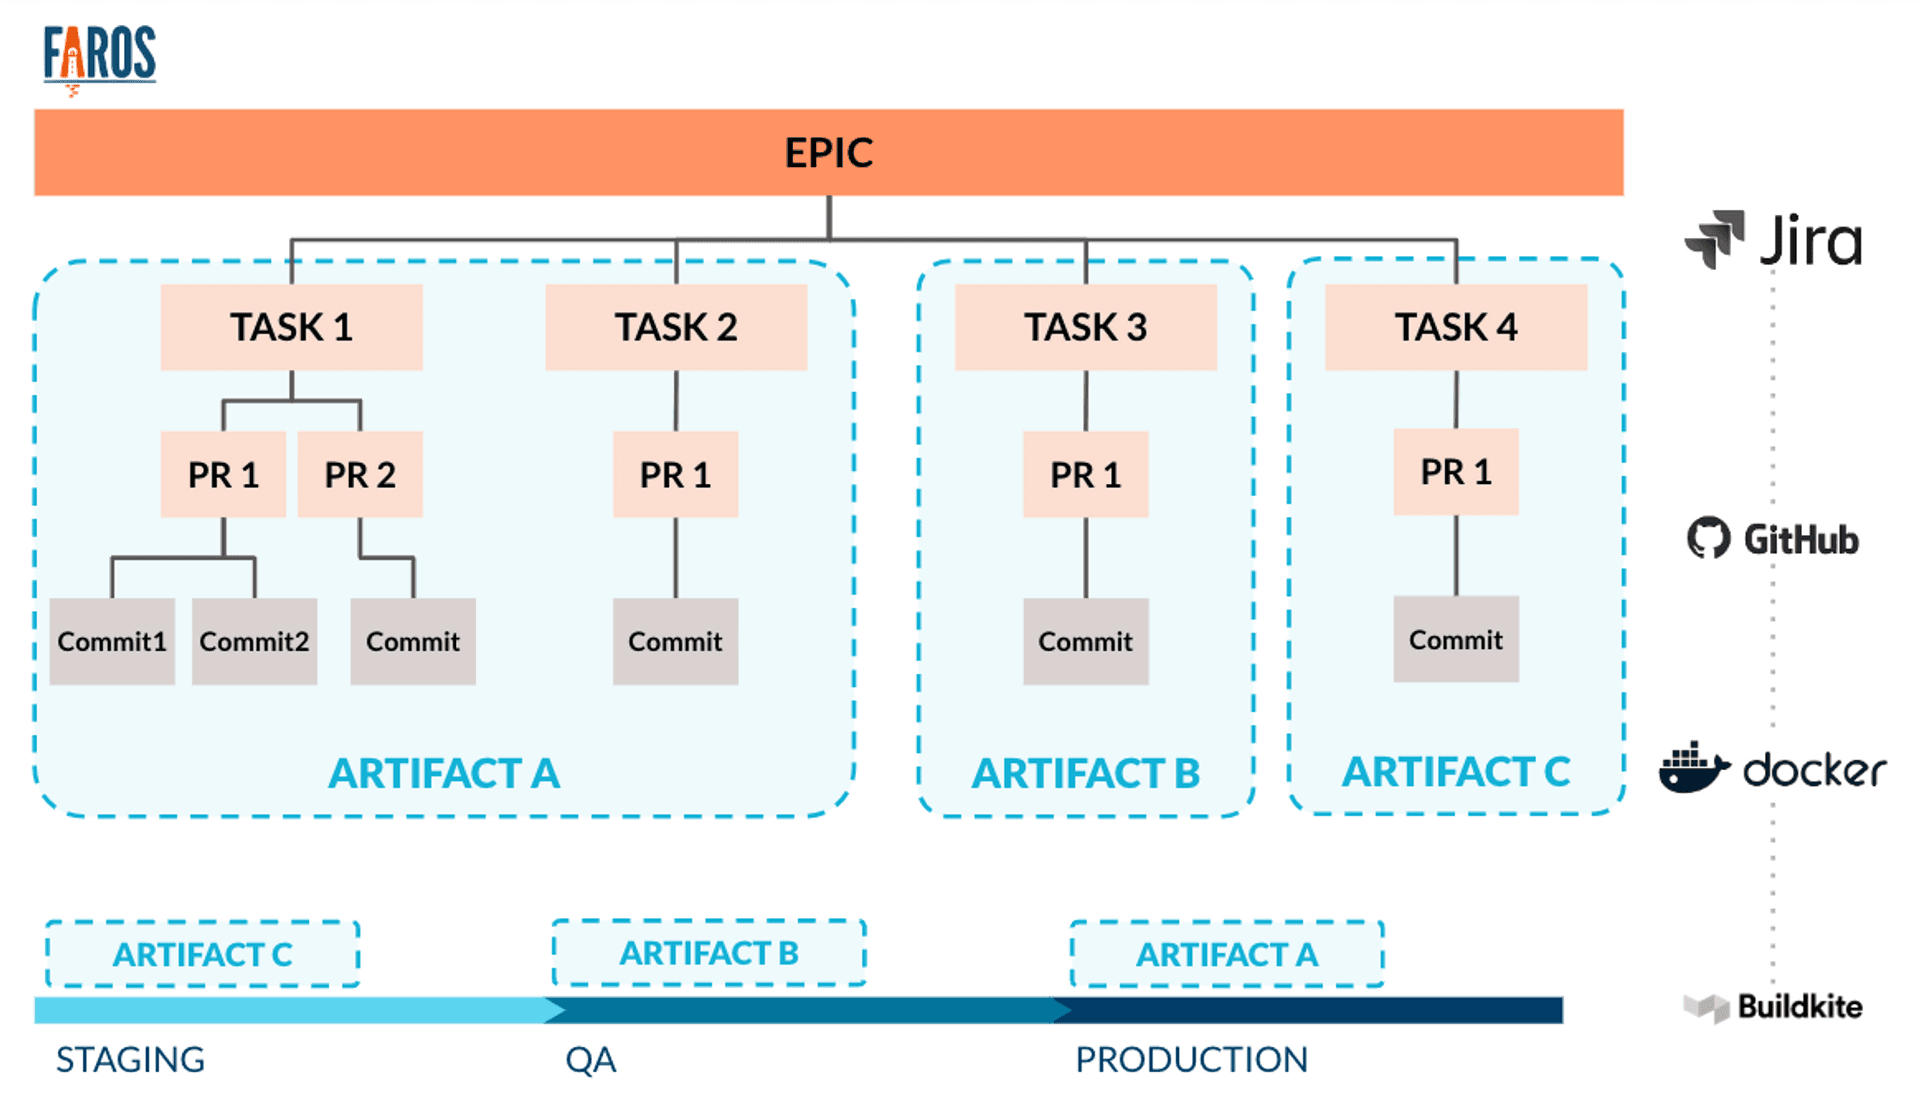 Diagram of the relationship between epics, tasks, PRs, commits and artifacts as they progress through staging, QA and production environments